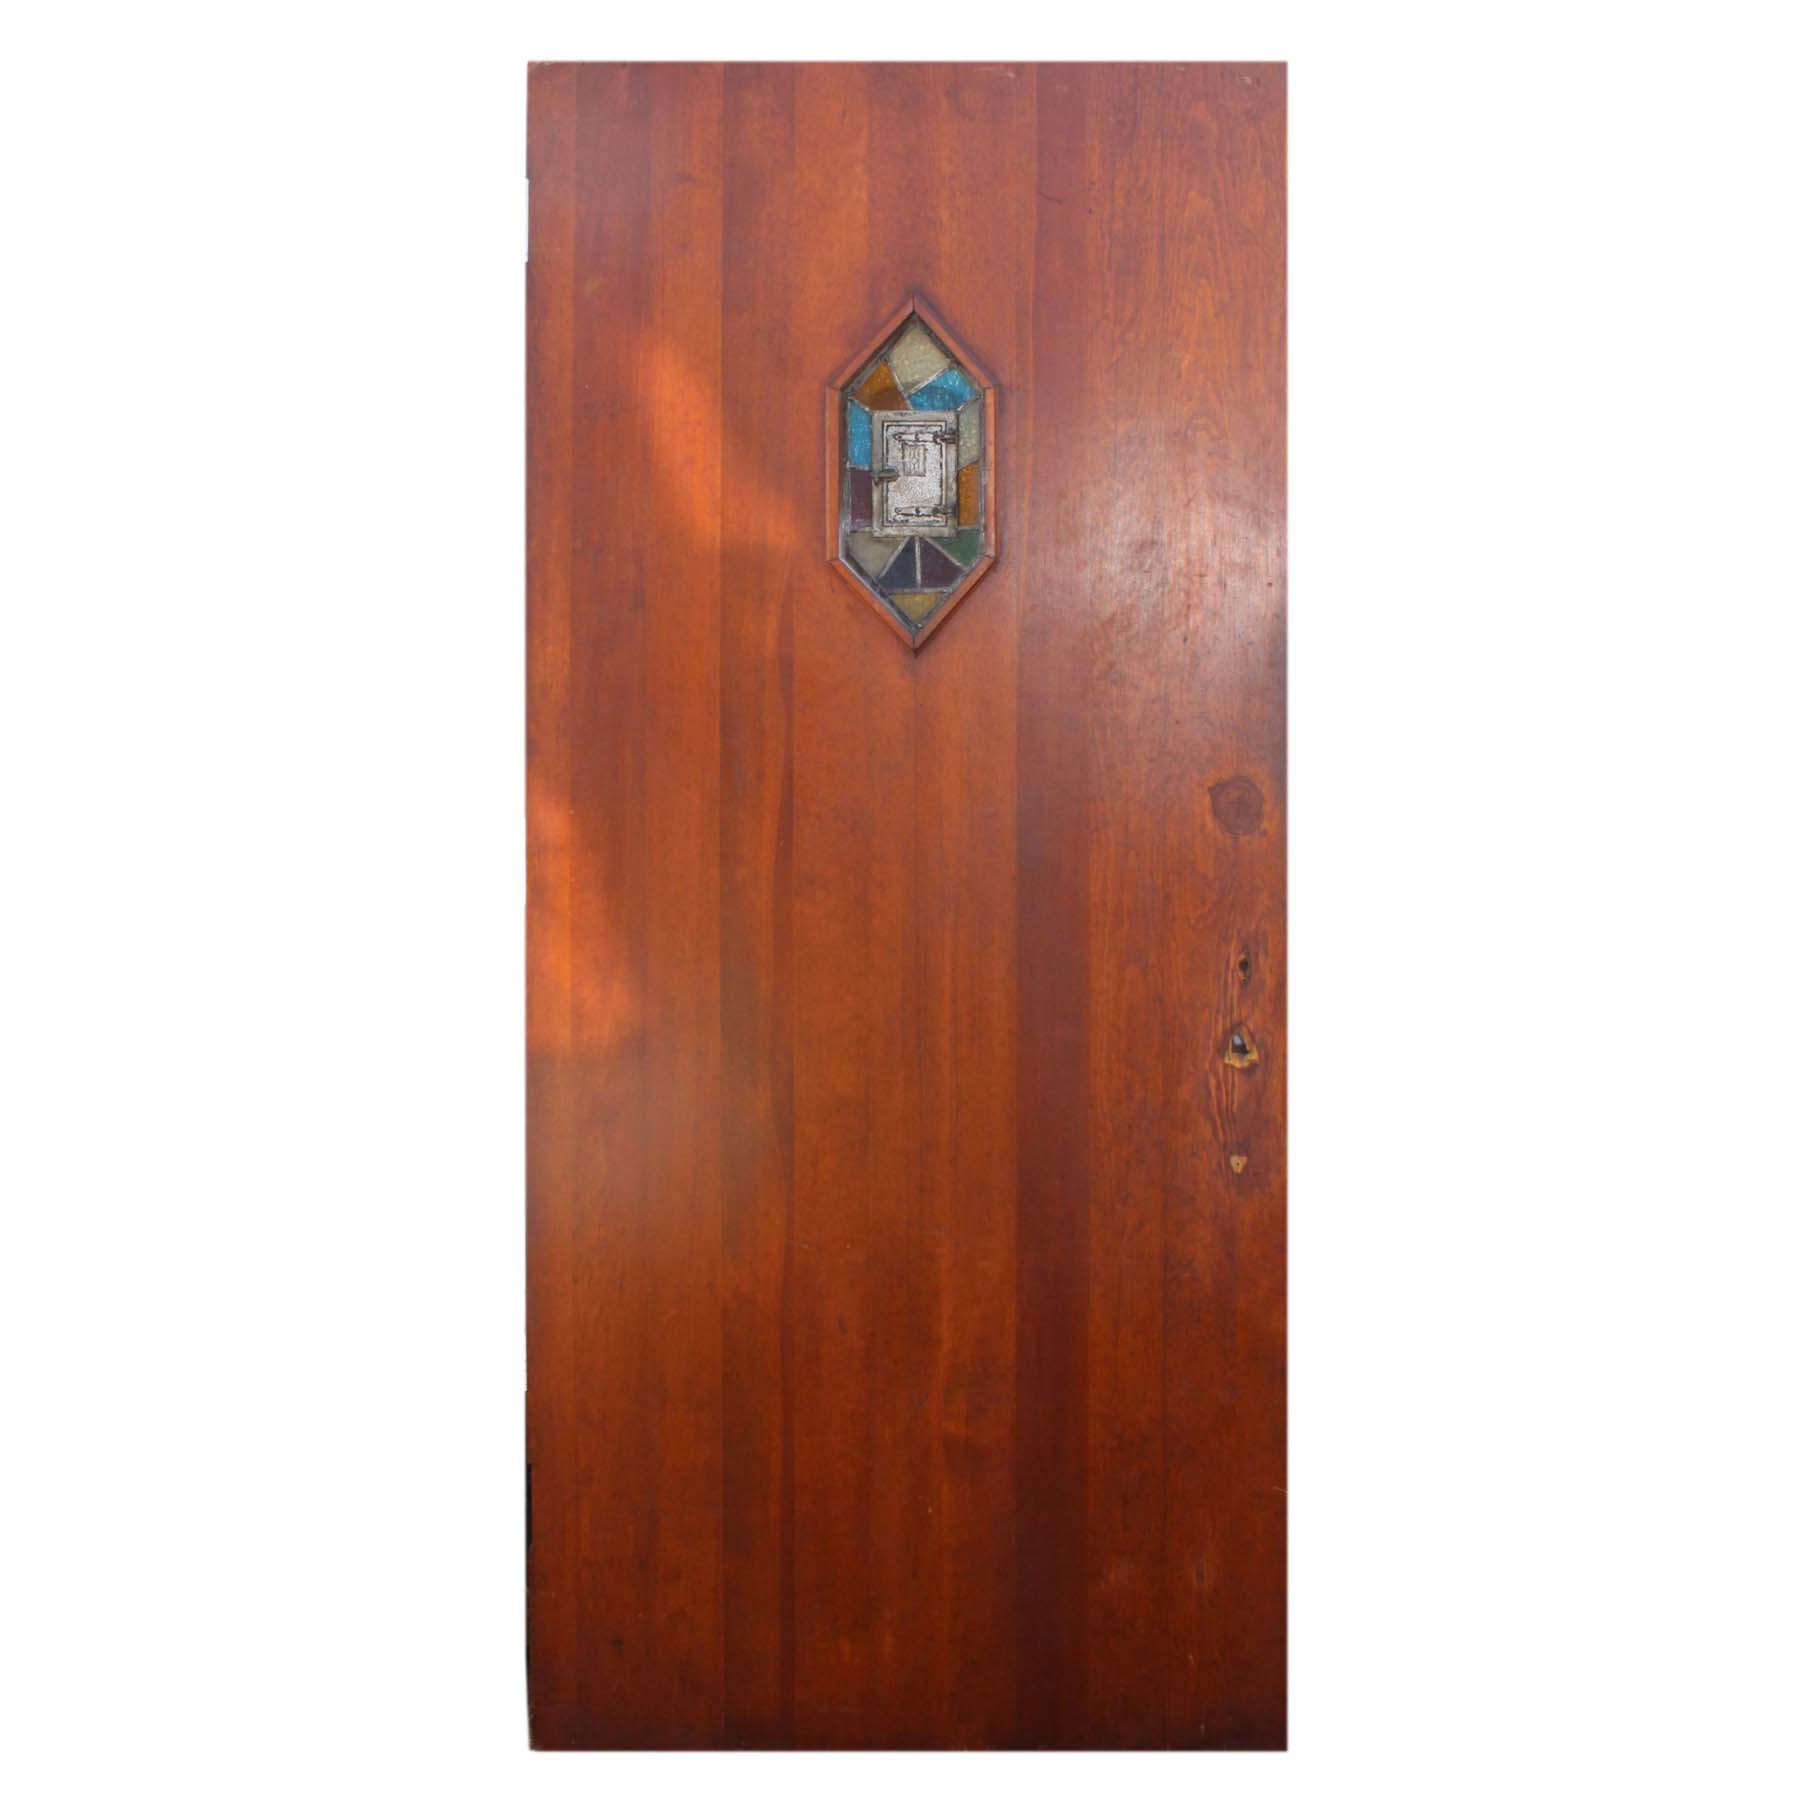 SOLD Reclaimed 35” Plank Door with Stained Glass Speakeasy-71487